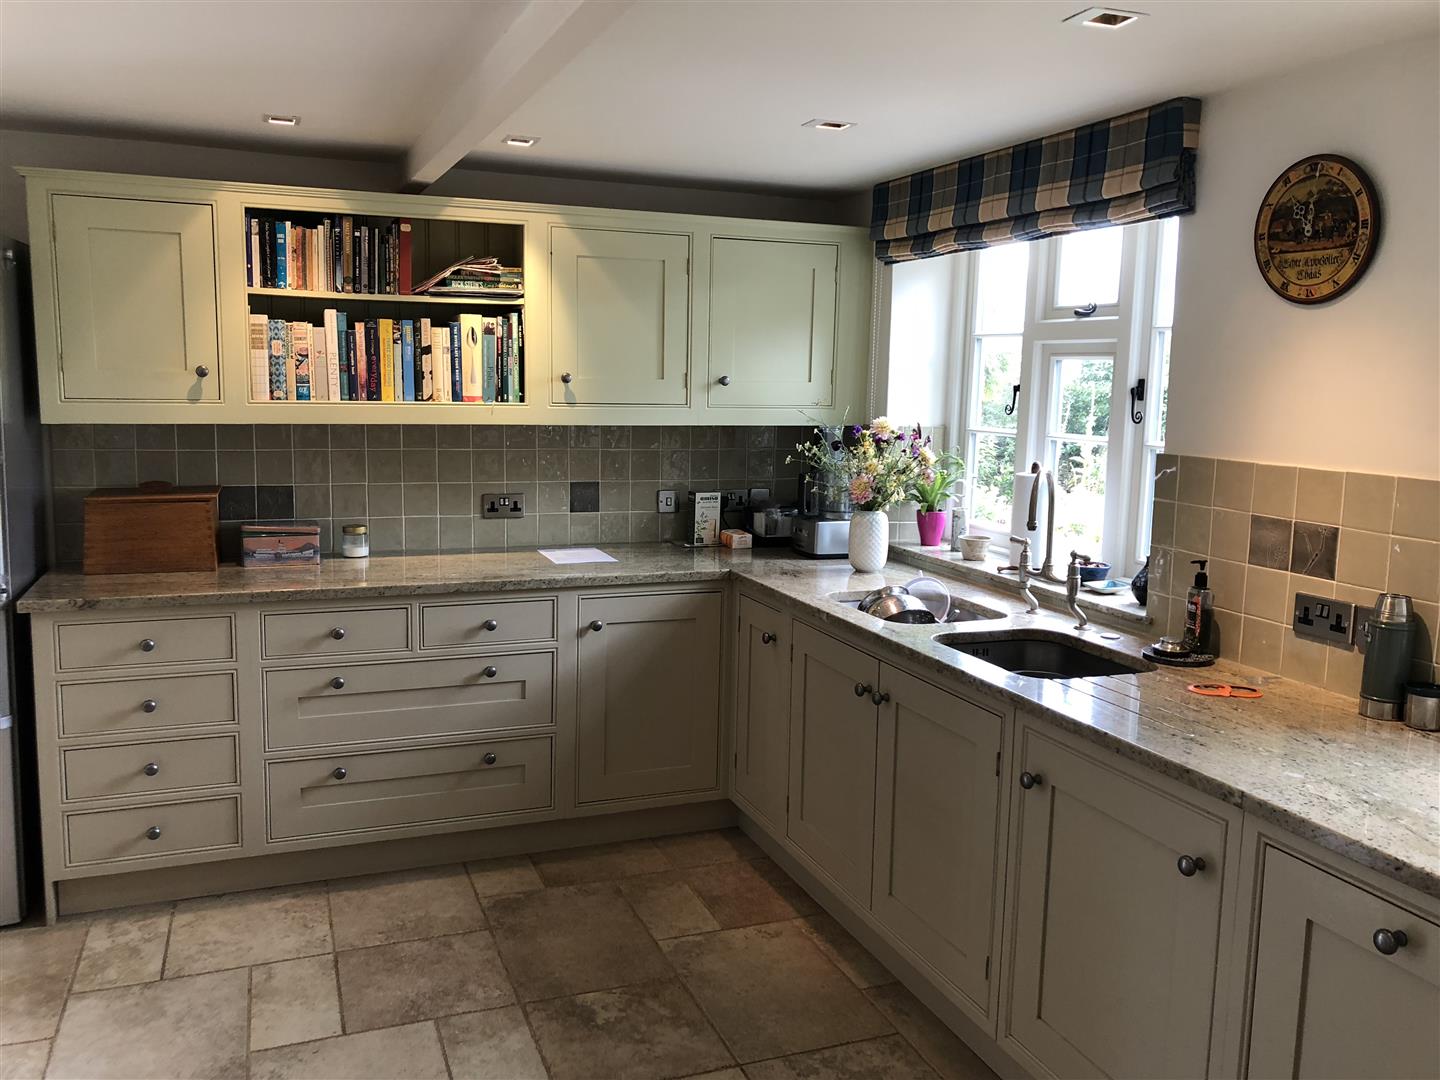 Redbrook kitchens design and install bespoke kitchens in Gloucestershire. Two tone kitchen with lovely granite tops